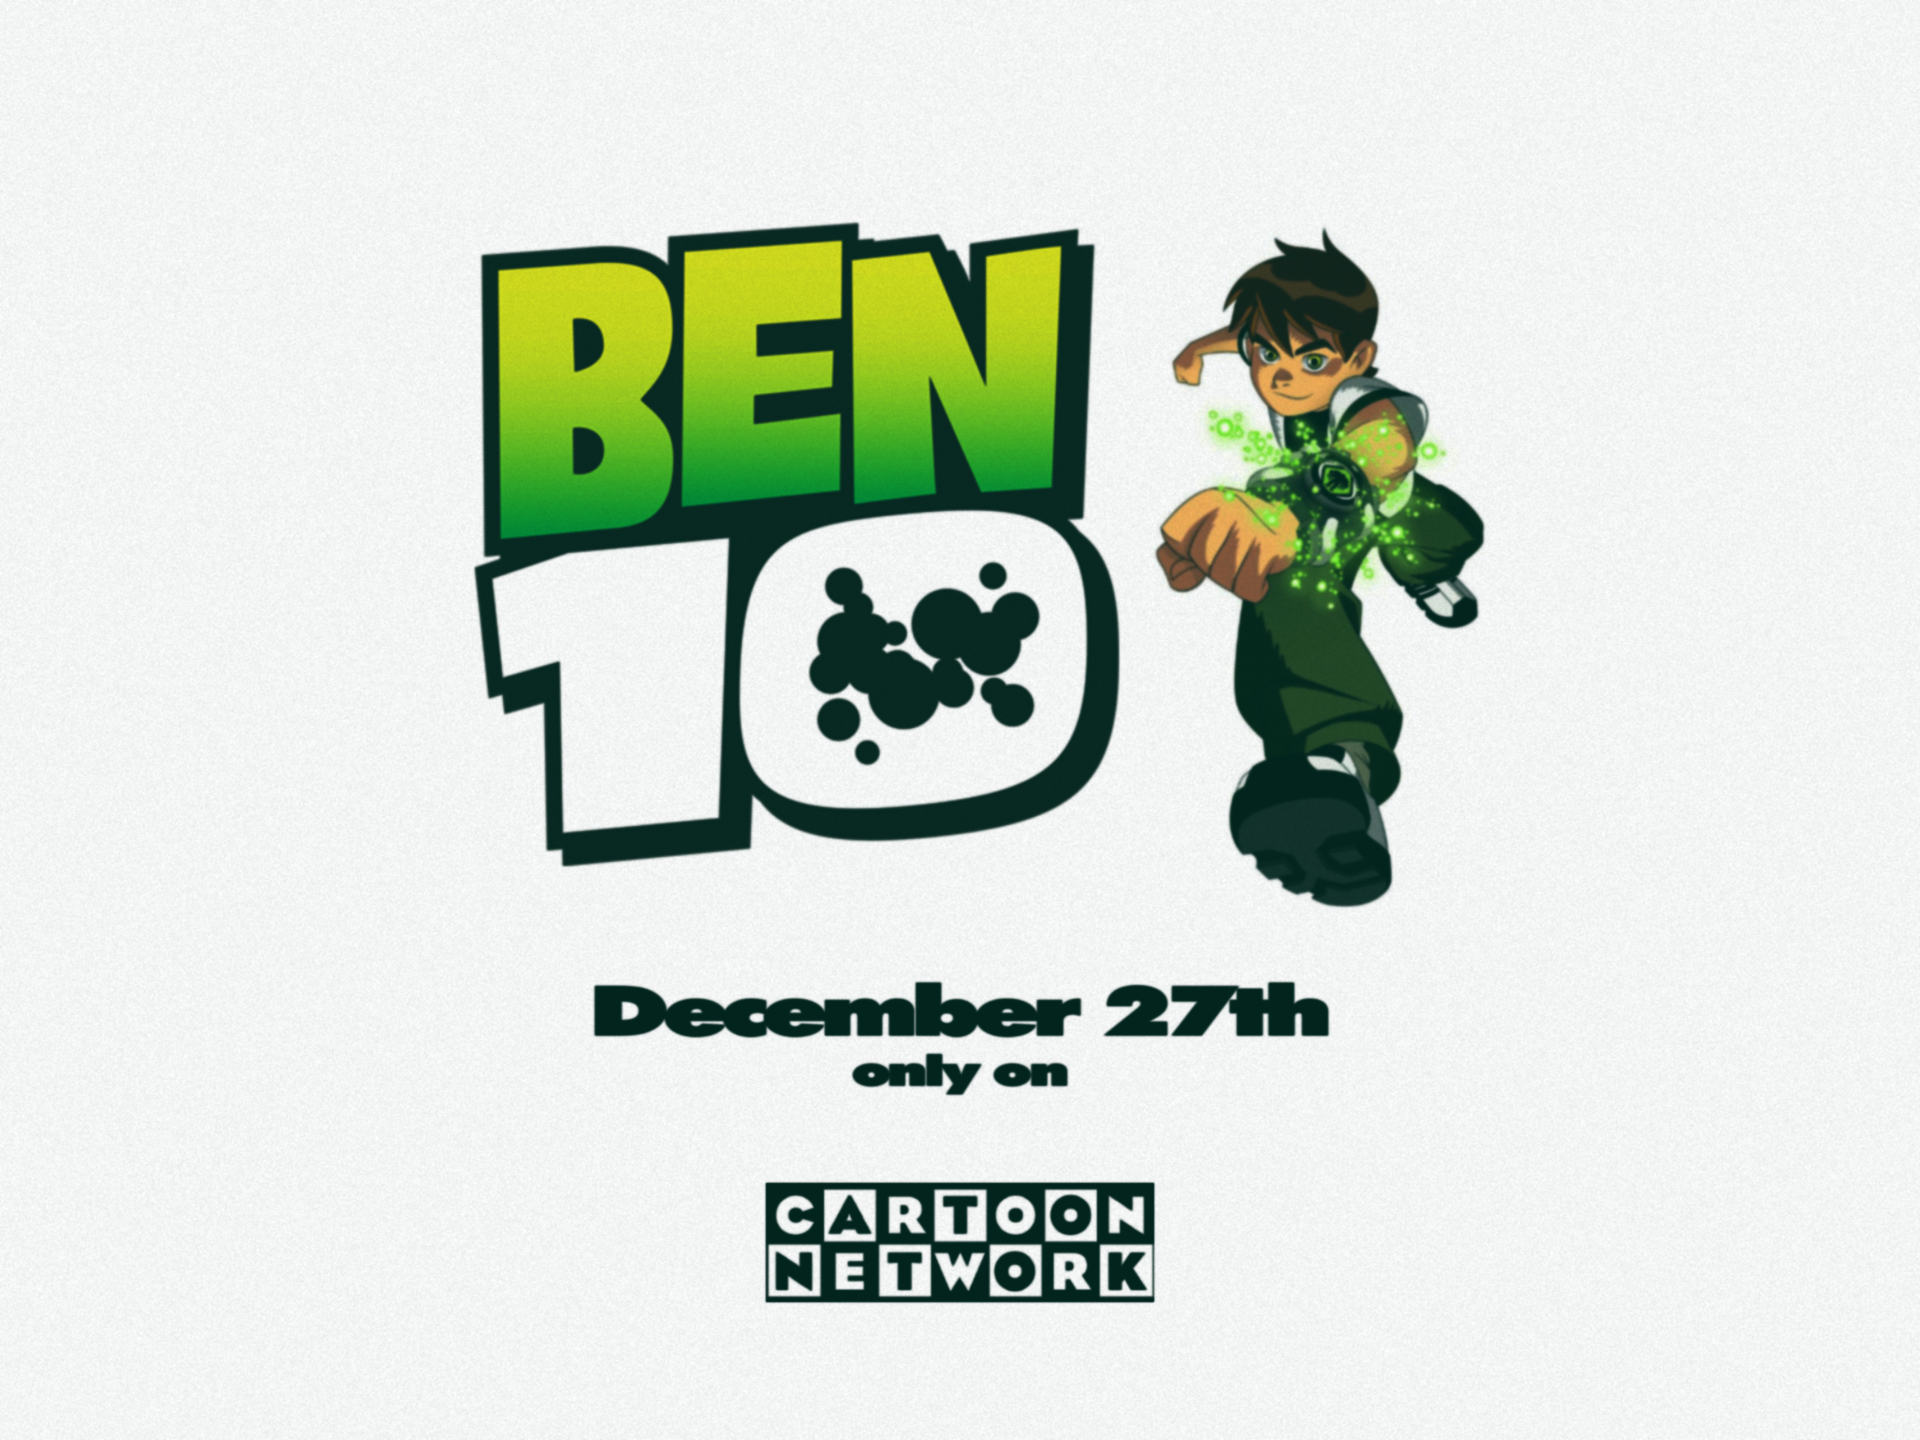 Cartoon Network: Ben 10 Promo (2005) (4:3) VHS by TheYoungHistorian on  DeviantArt